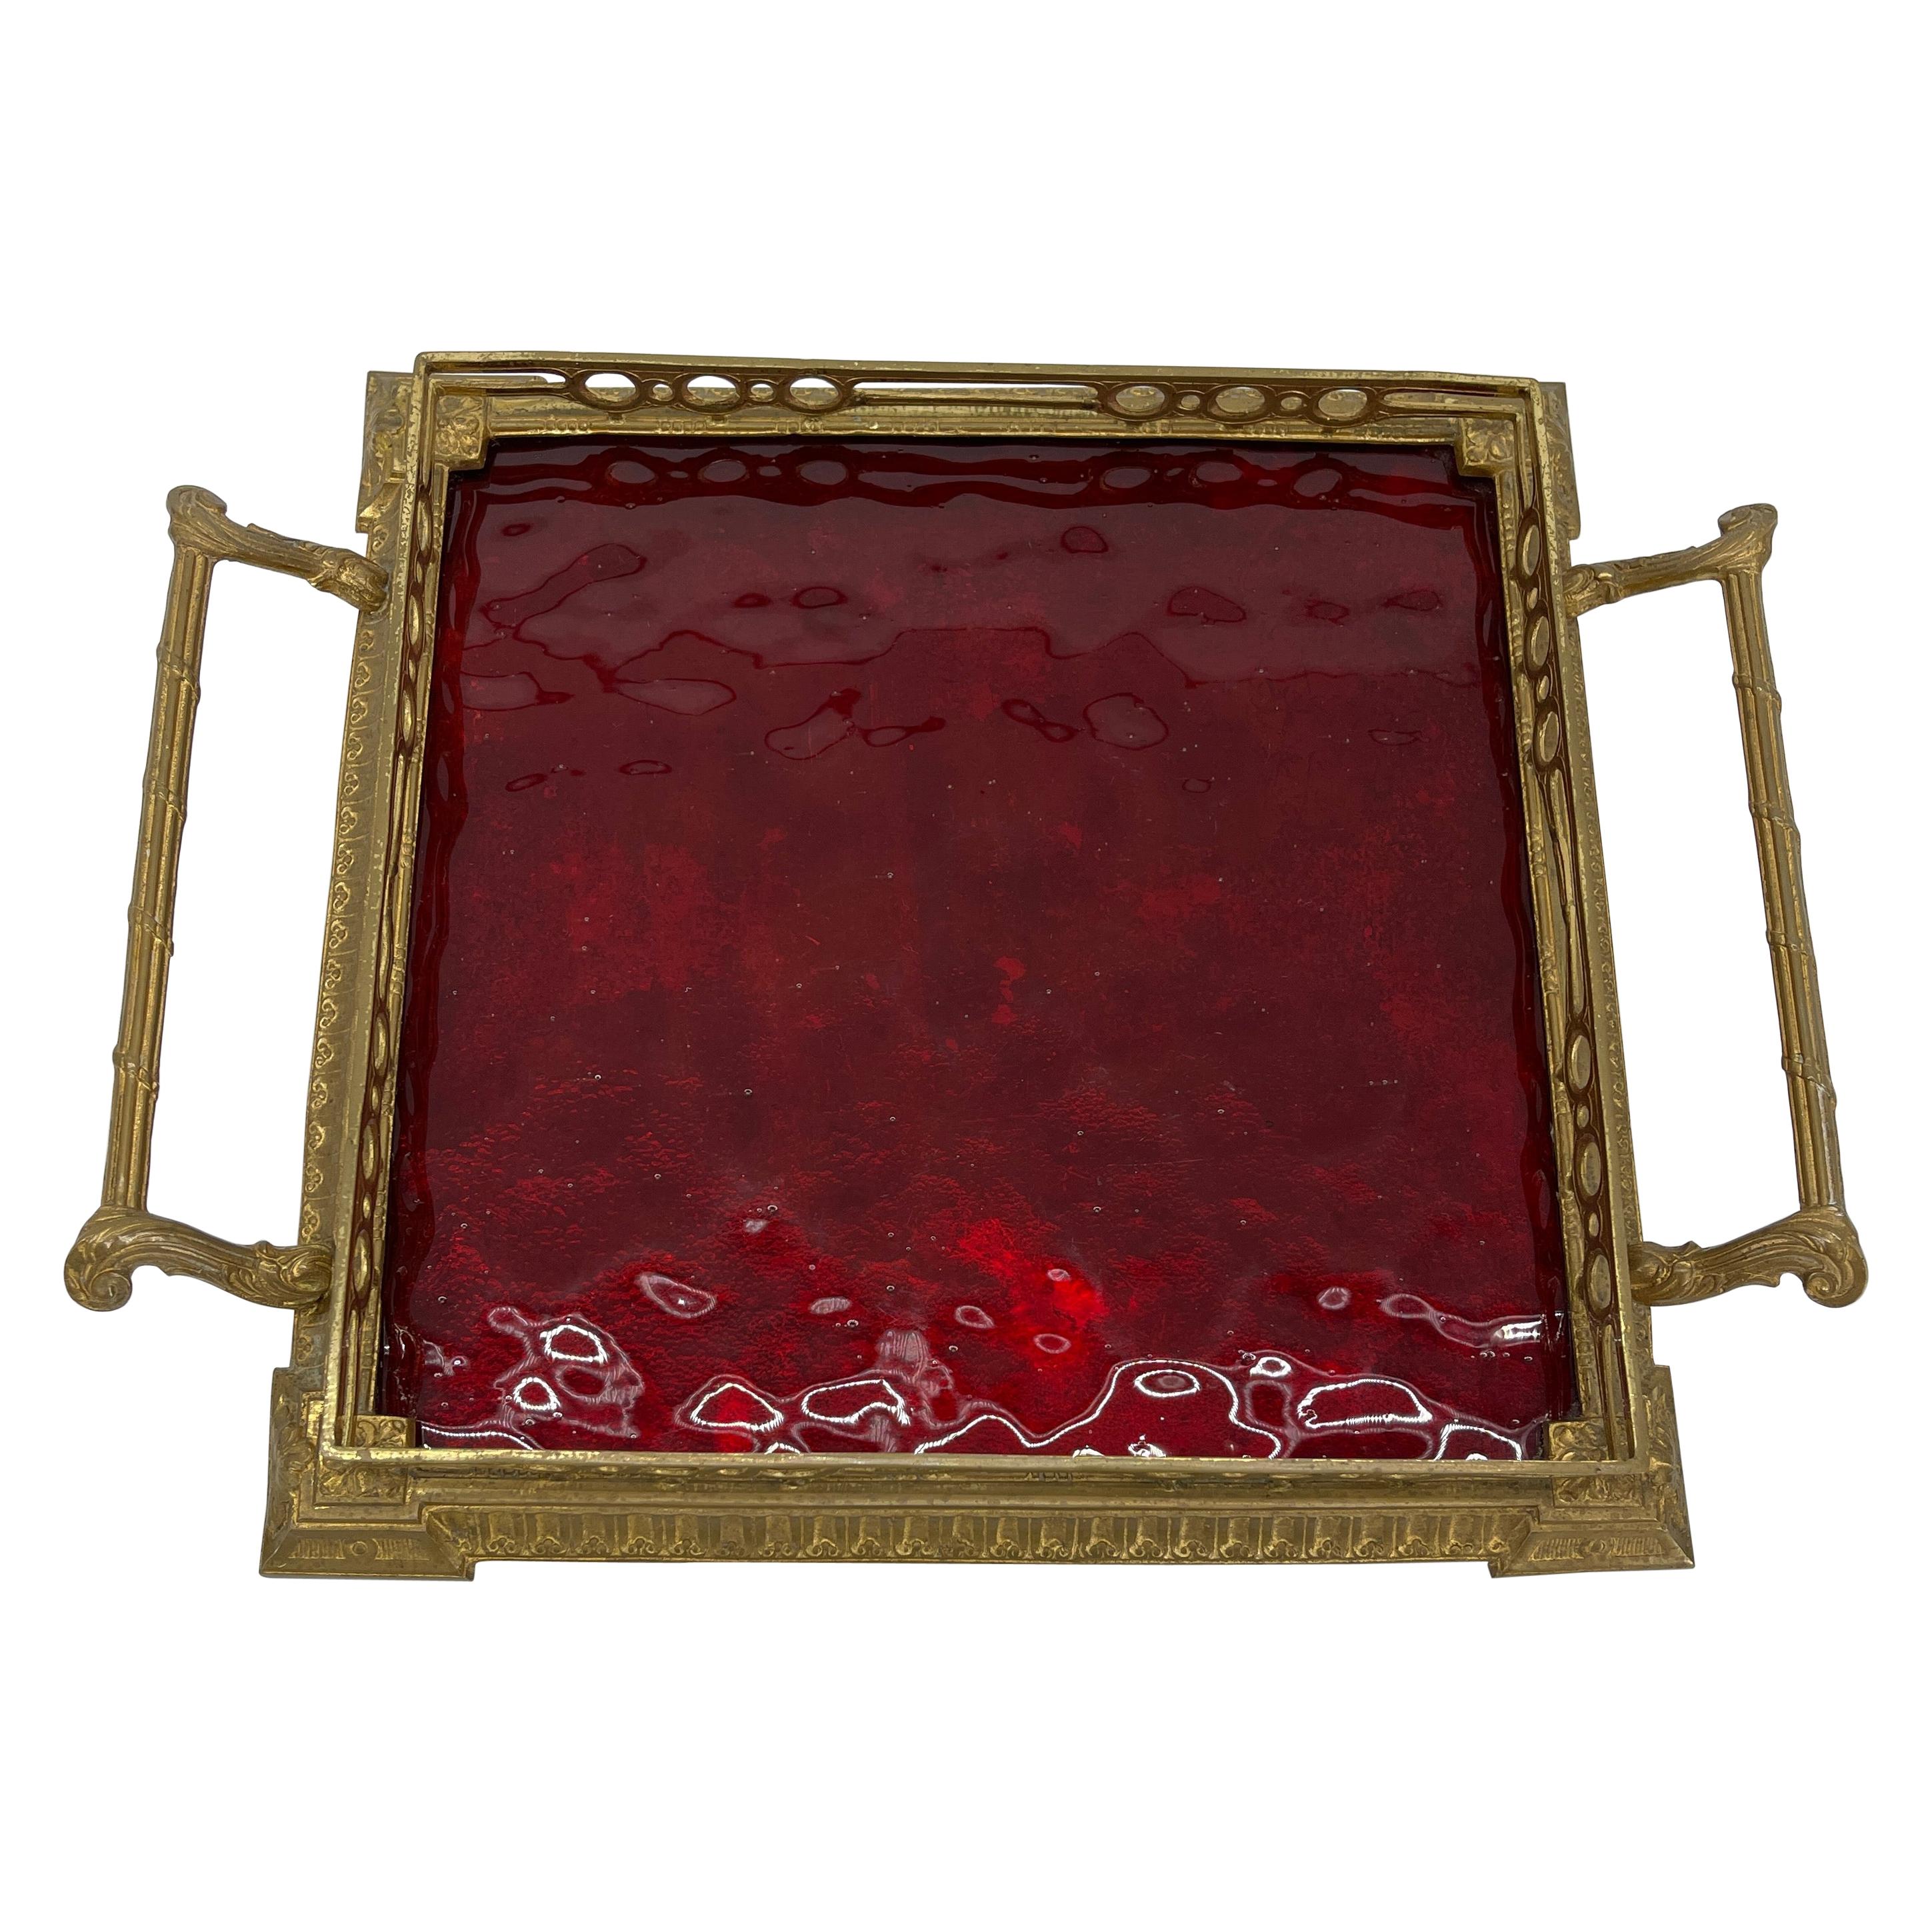 Hollywood Regency Gilt Vanity Tray with Red Glass Insert and Handles